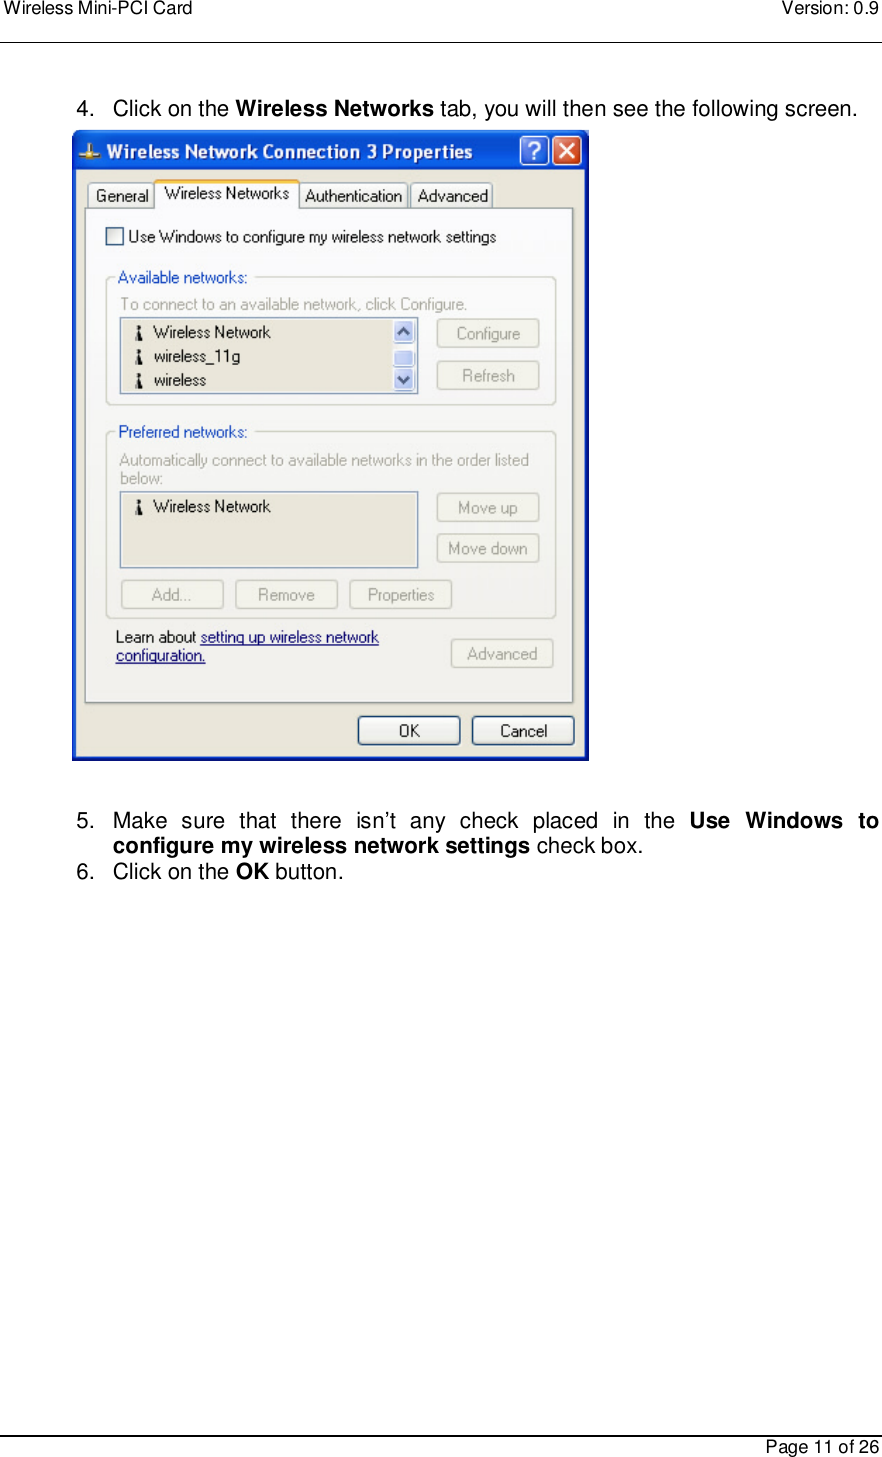 Wireless Mini-PCI Card    Version: 0.9    Page 11 of 26  4.  Click on the Wireless Networks tab, you will then see the following screen.                      5.  Make  sure  that  there  isn’t  any  check  placed  in  the  Use  Windows  to configure my wireless network settings check box. 6.  Click on the OK button.     